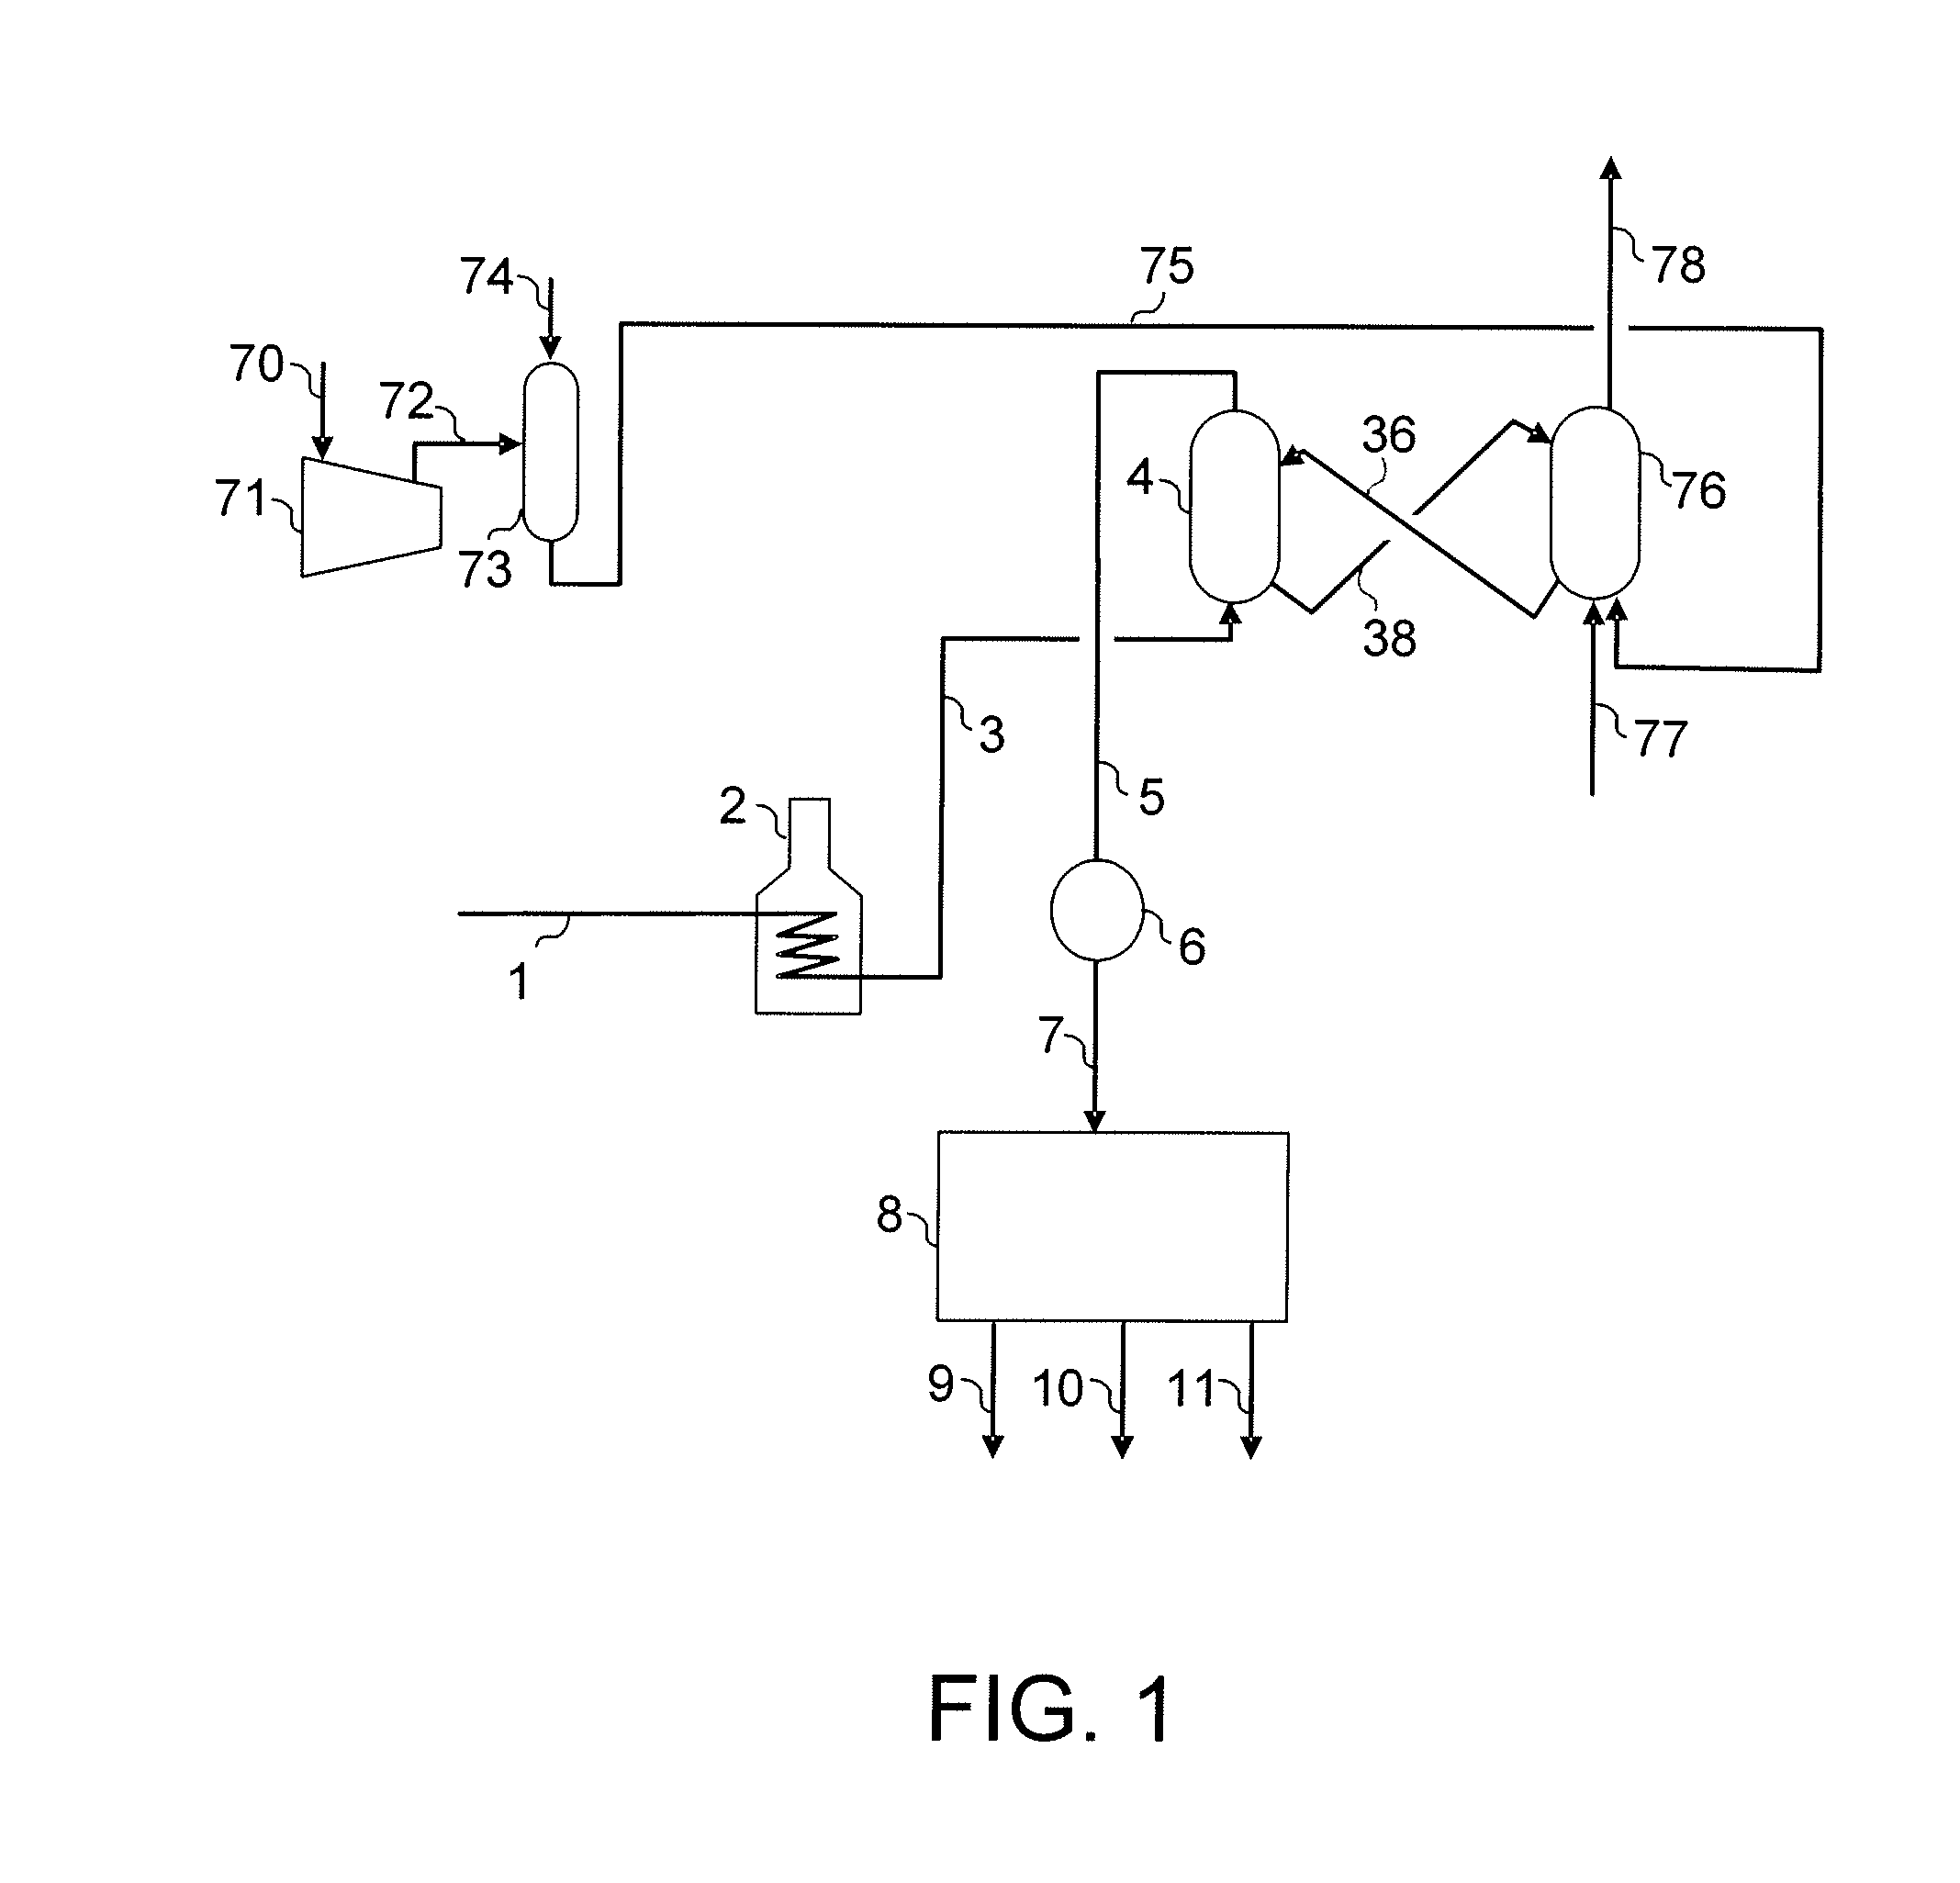 Fluidized Bed Reactor with Back-Mixing for Dehydrogenation of Light Paraffins